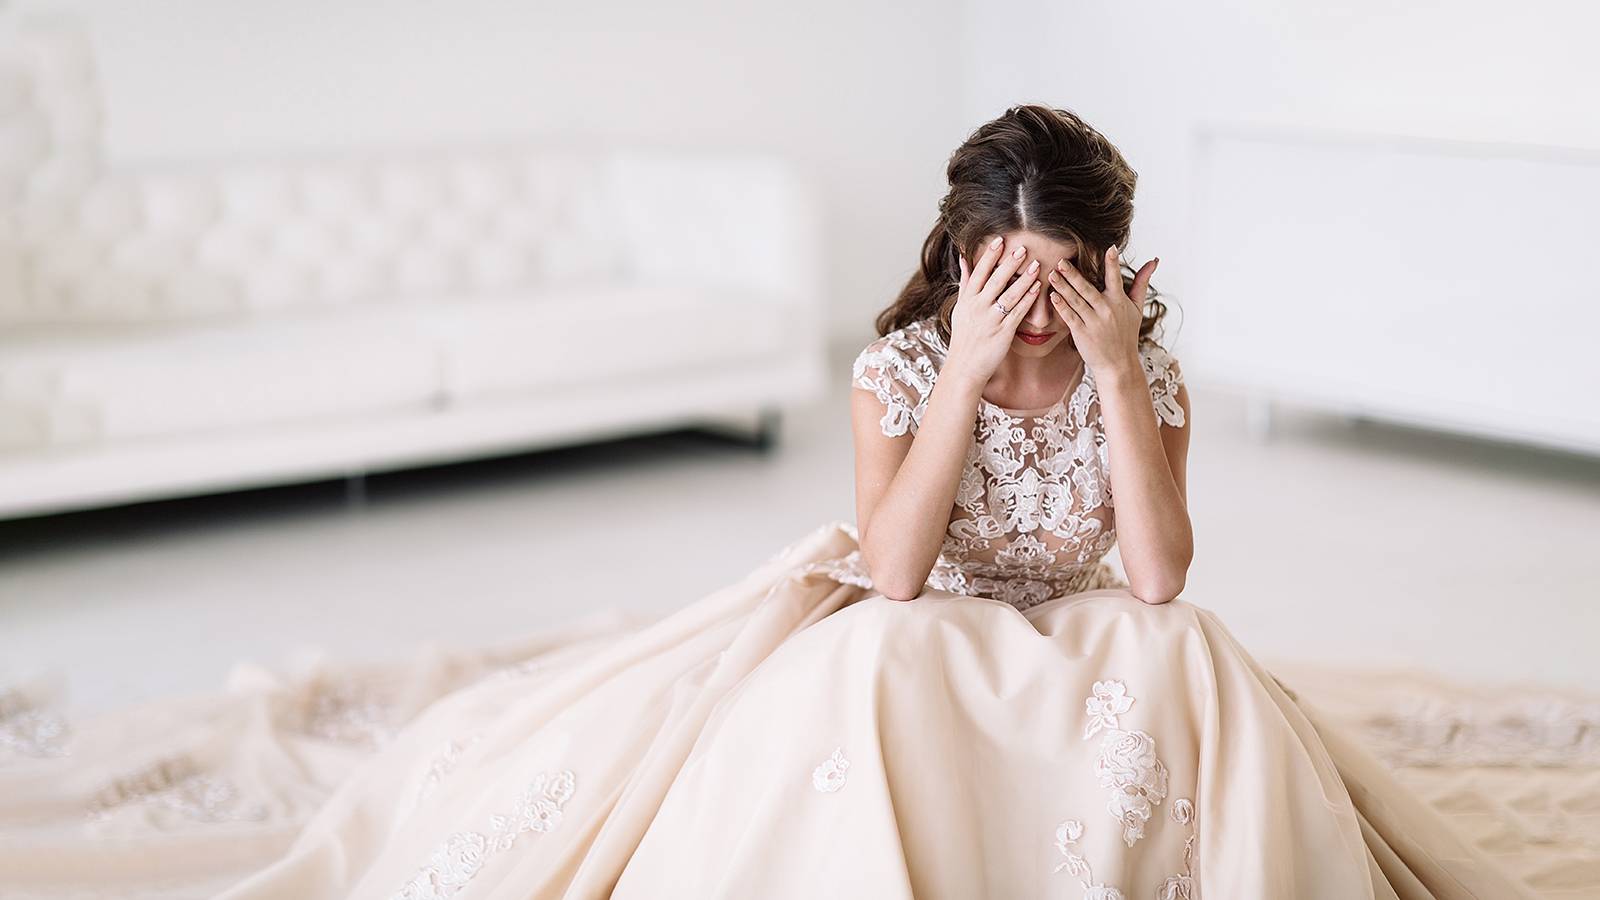 the bride sits in a white room and is sad. Natural light. covers